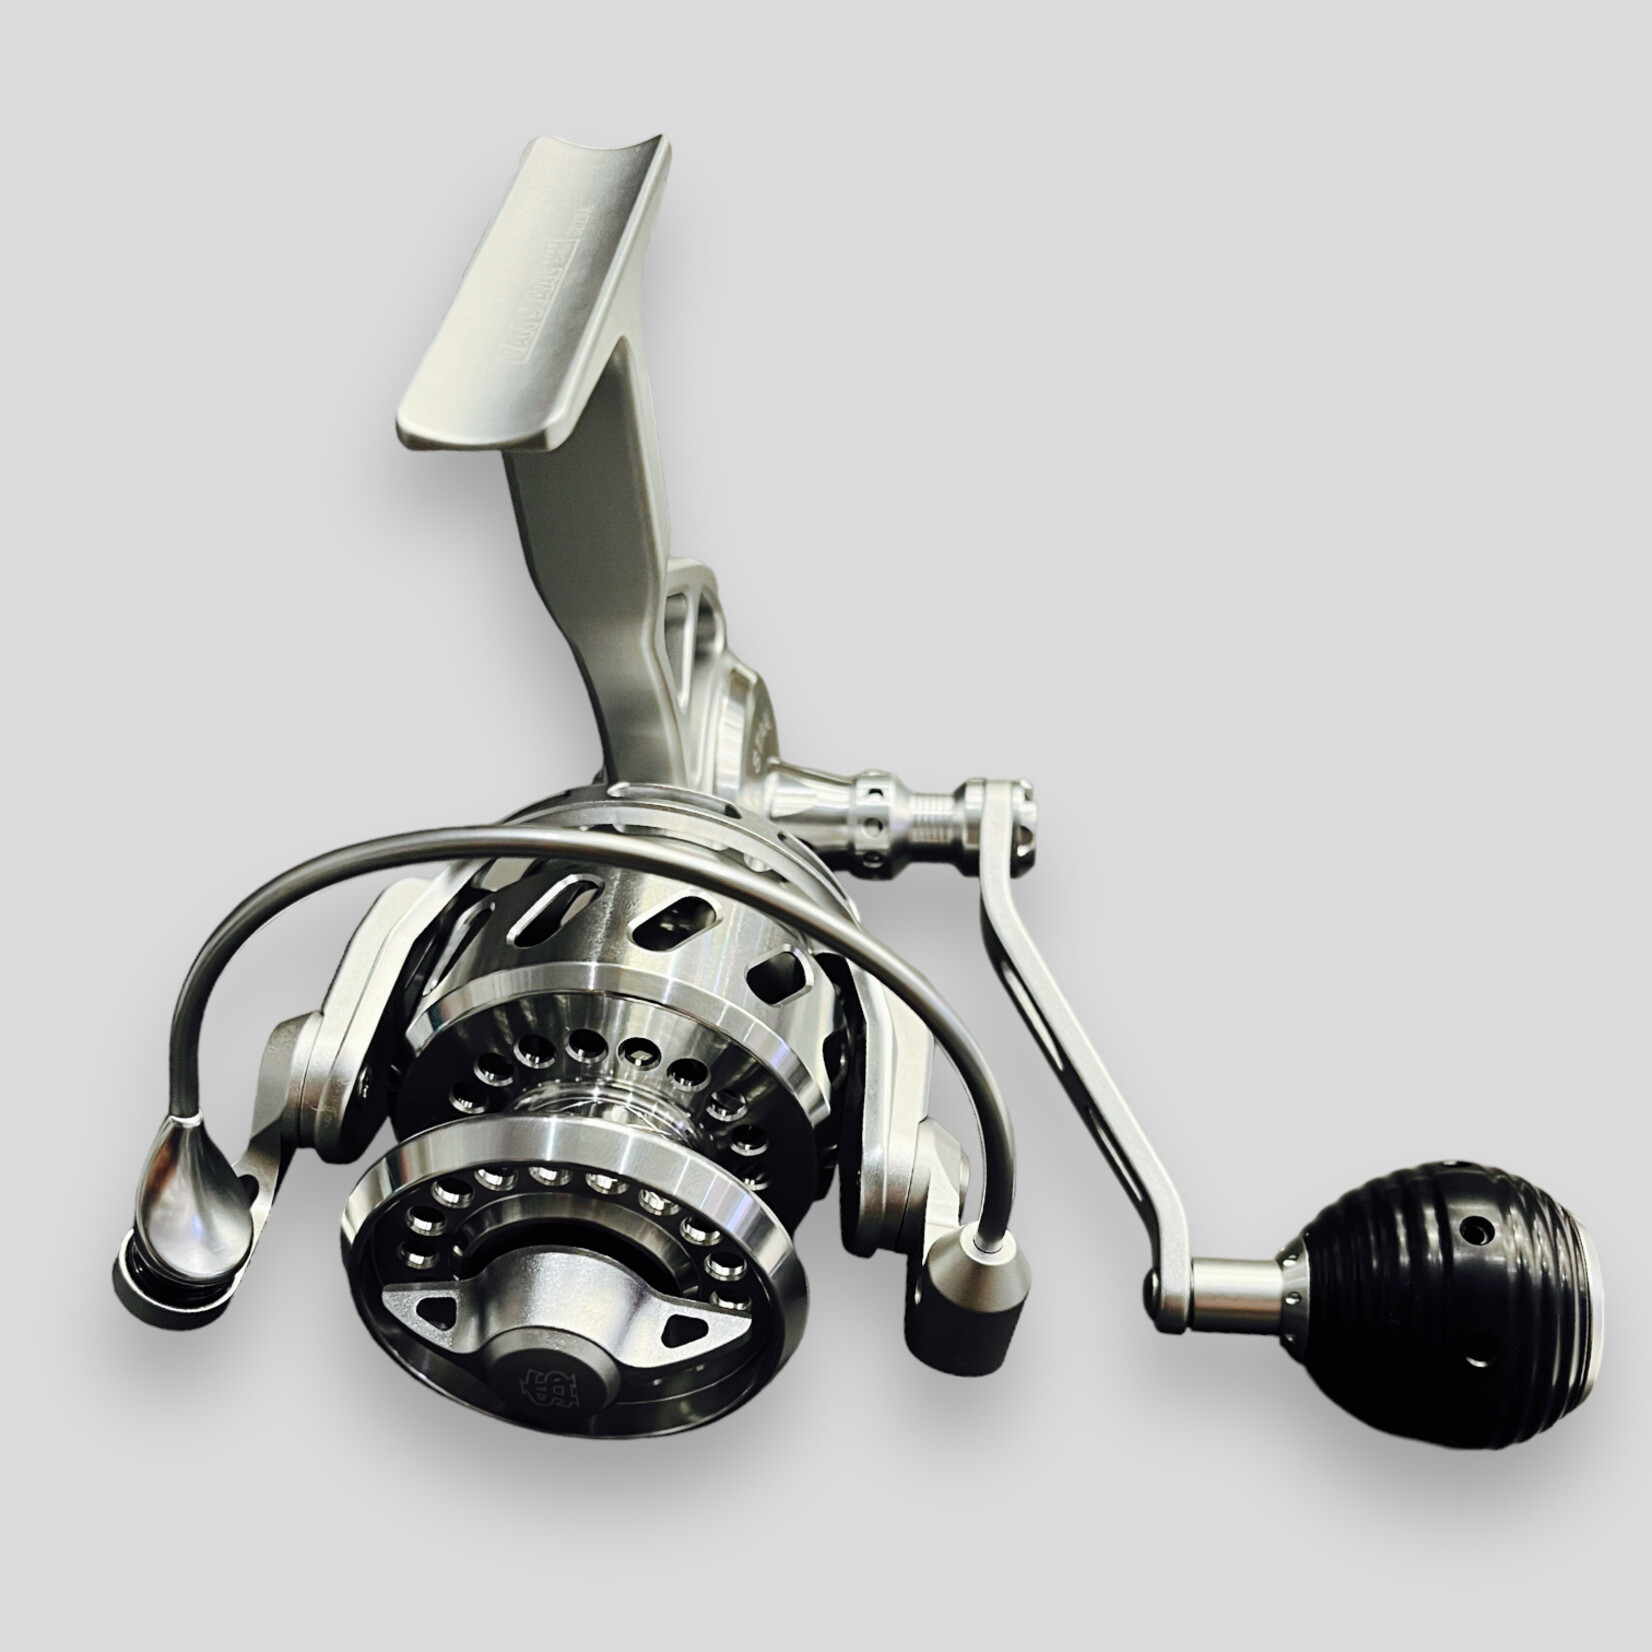 Black Van Staal VR75 Spinning Reels are back in stock! Great